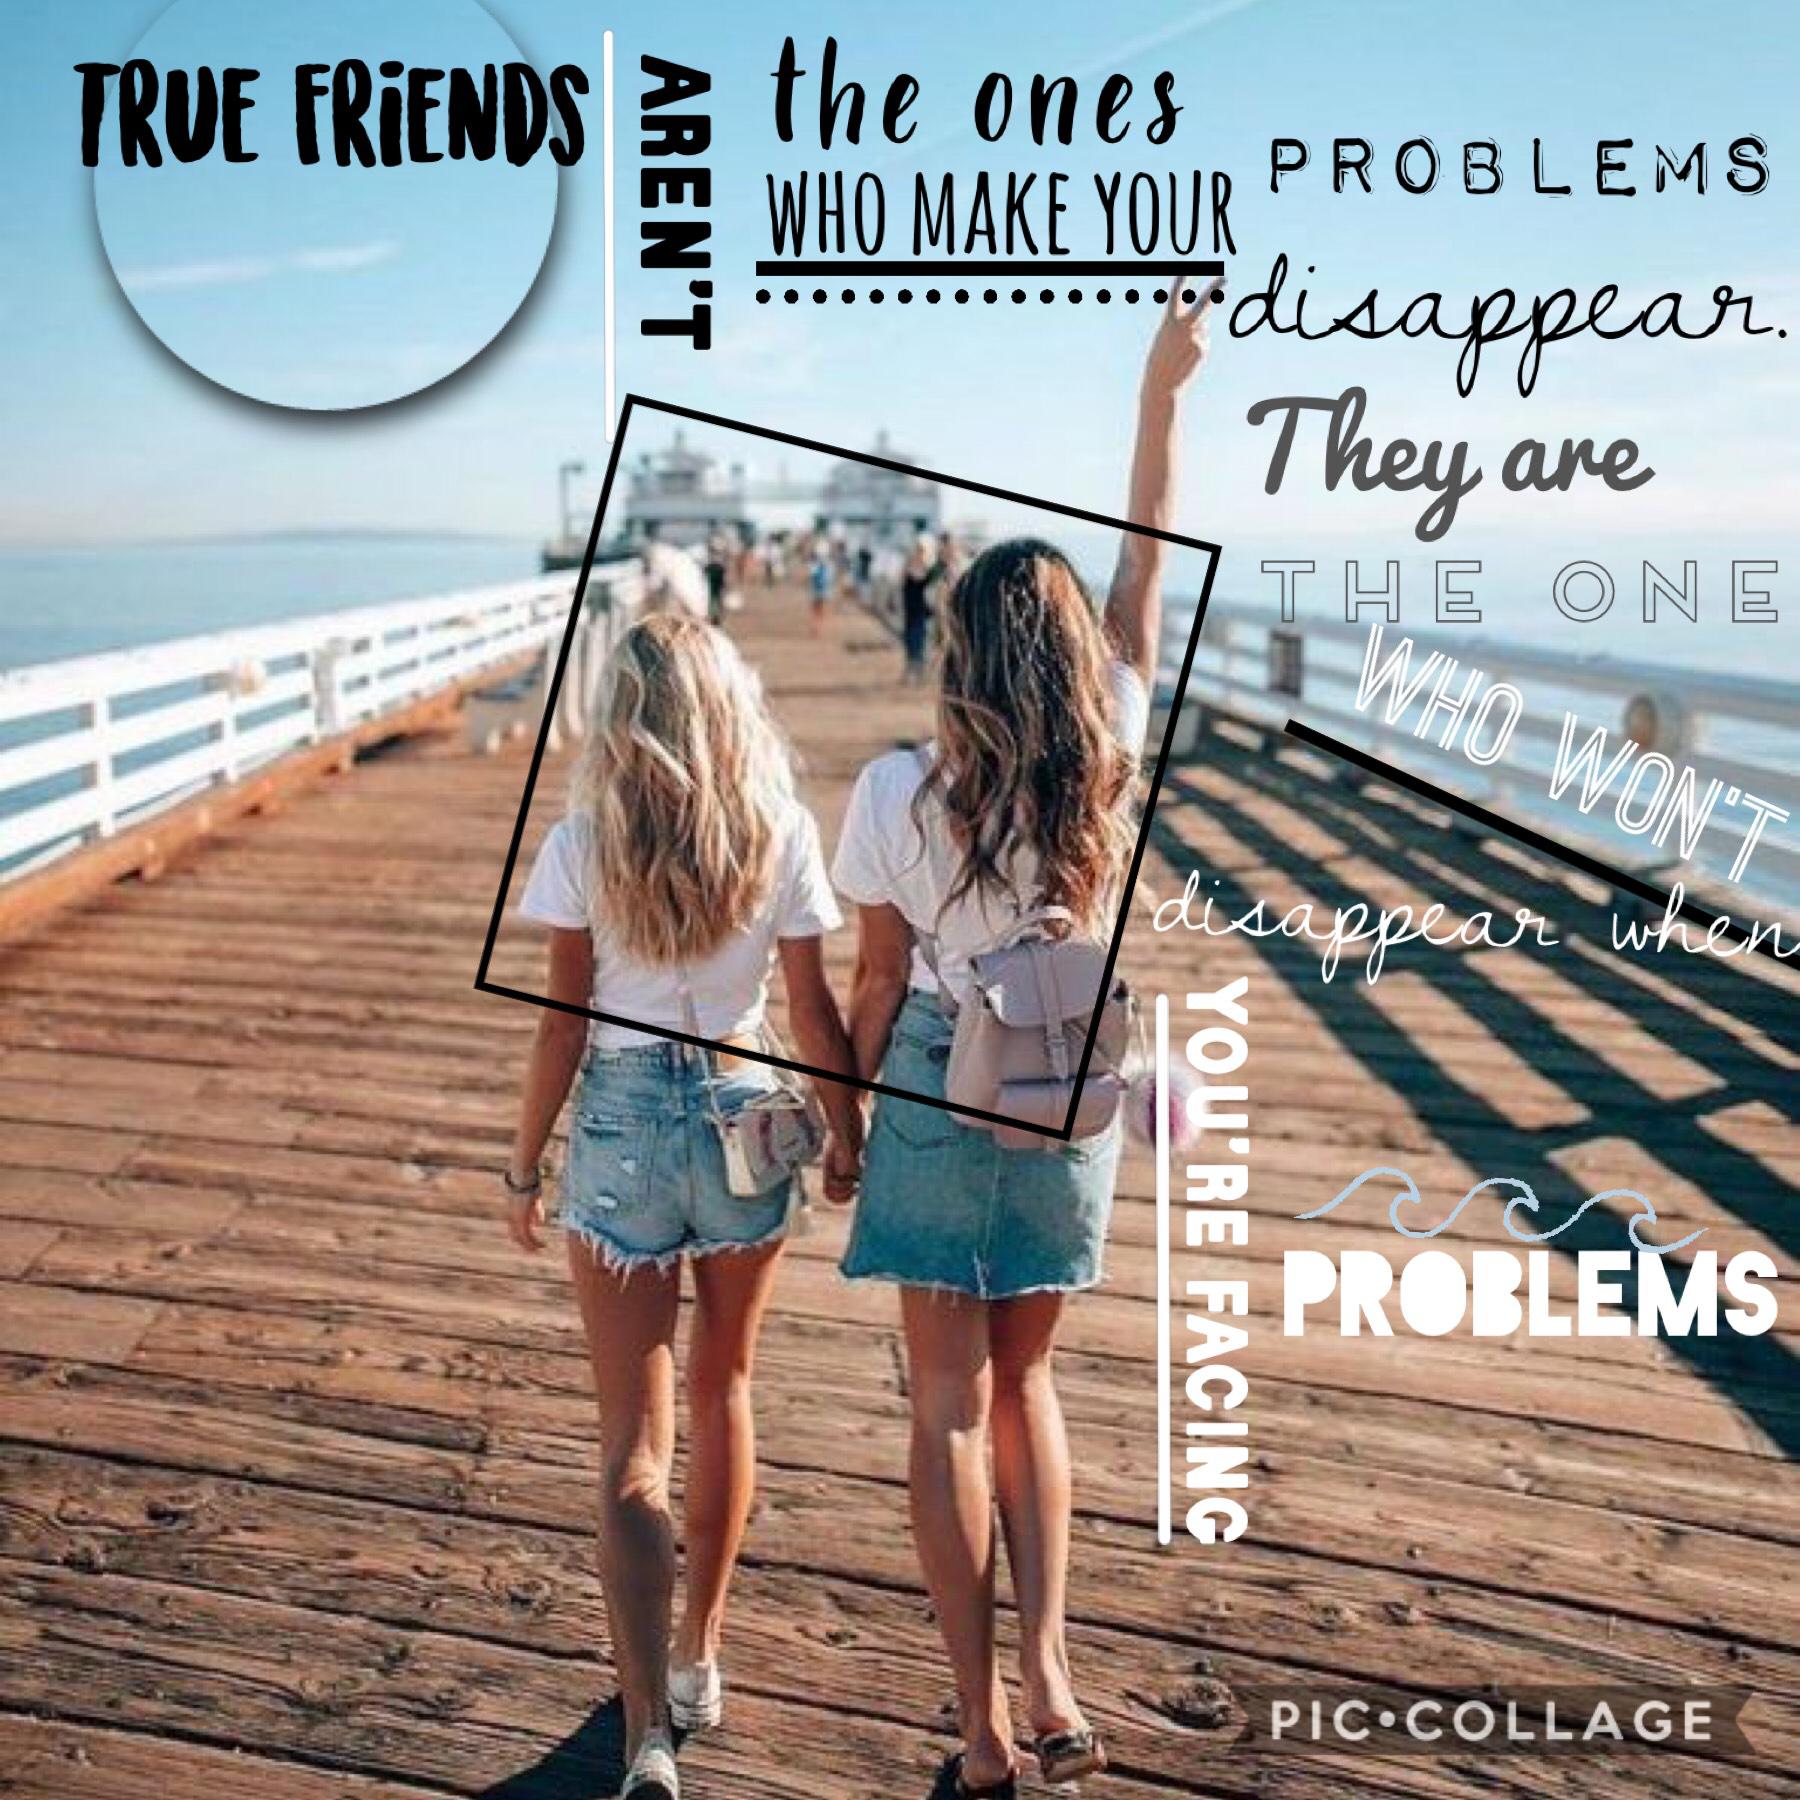 TTAAPP

True friends aren’t the one who make your problems disappear. They are the one who won’t disappear when you’re facing problem.